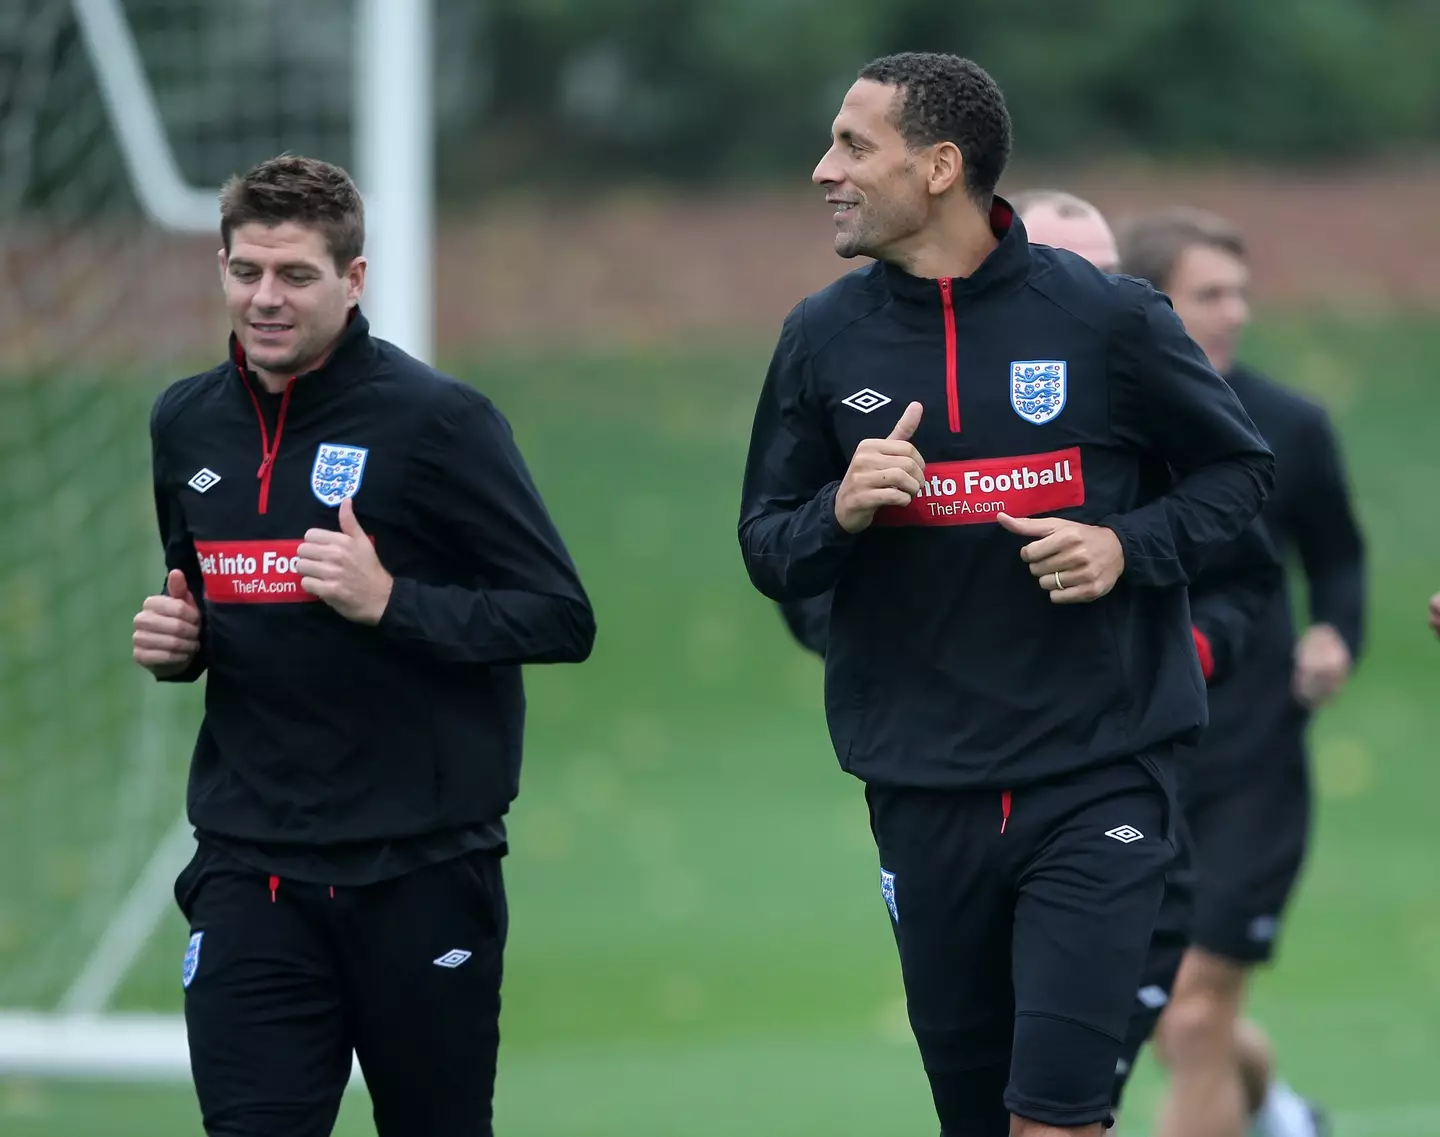 Gerrard and Ferdinand were rivals at club level but teammates for England. Image: Alamy